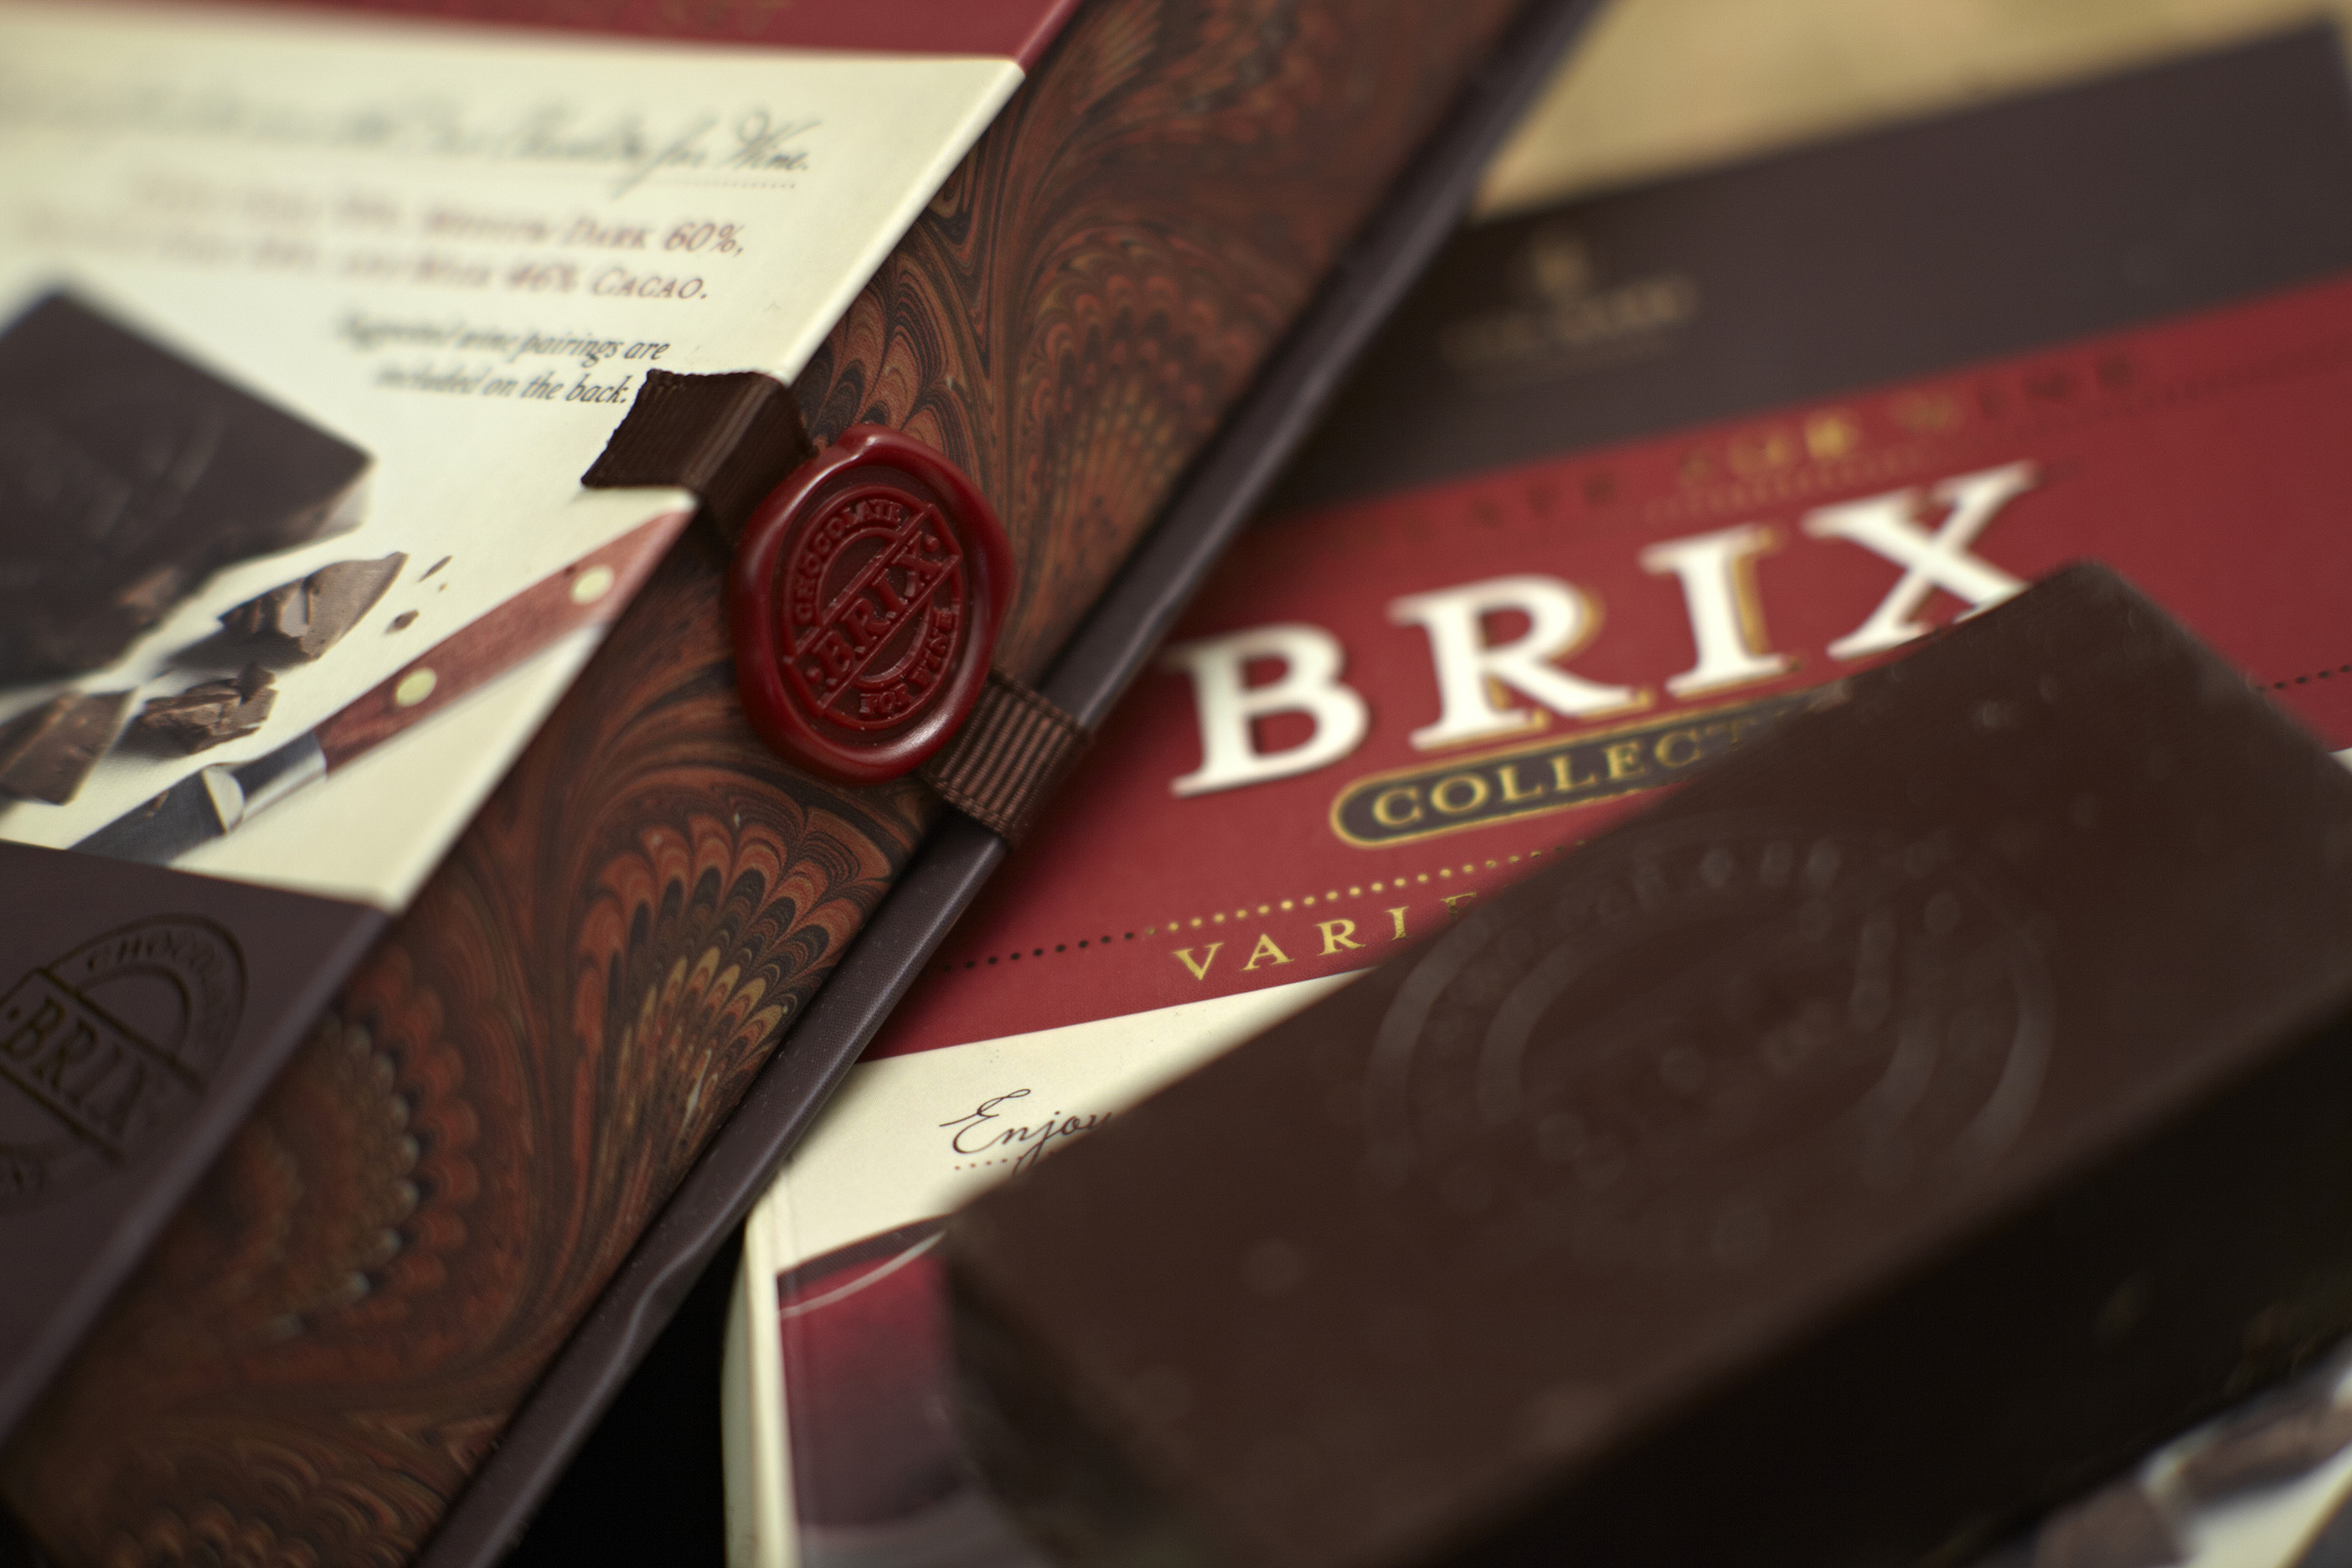 Study: Reselling luxury packaging can pay off! - Luxus Plus